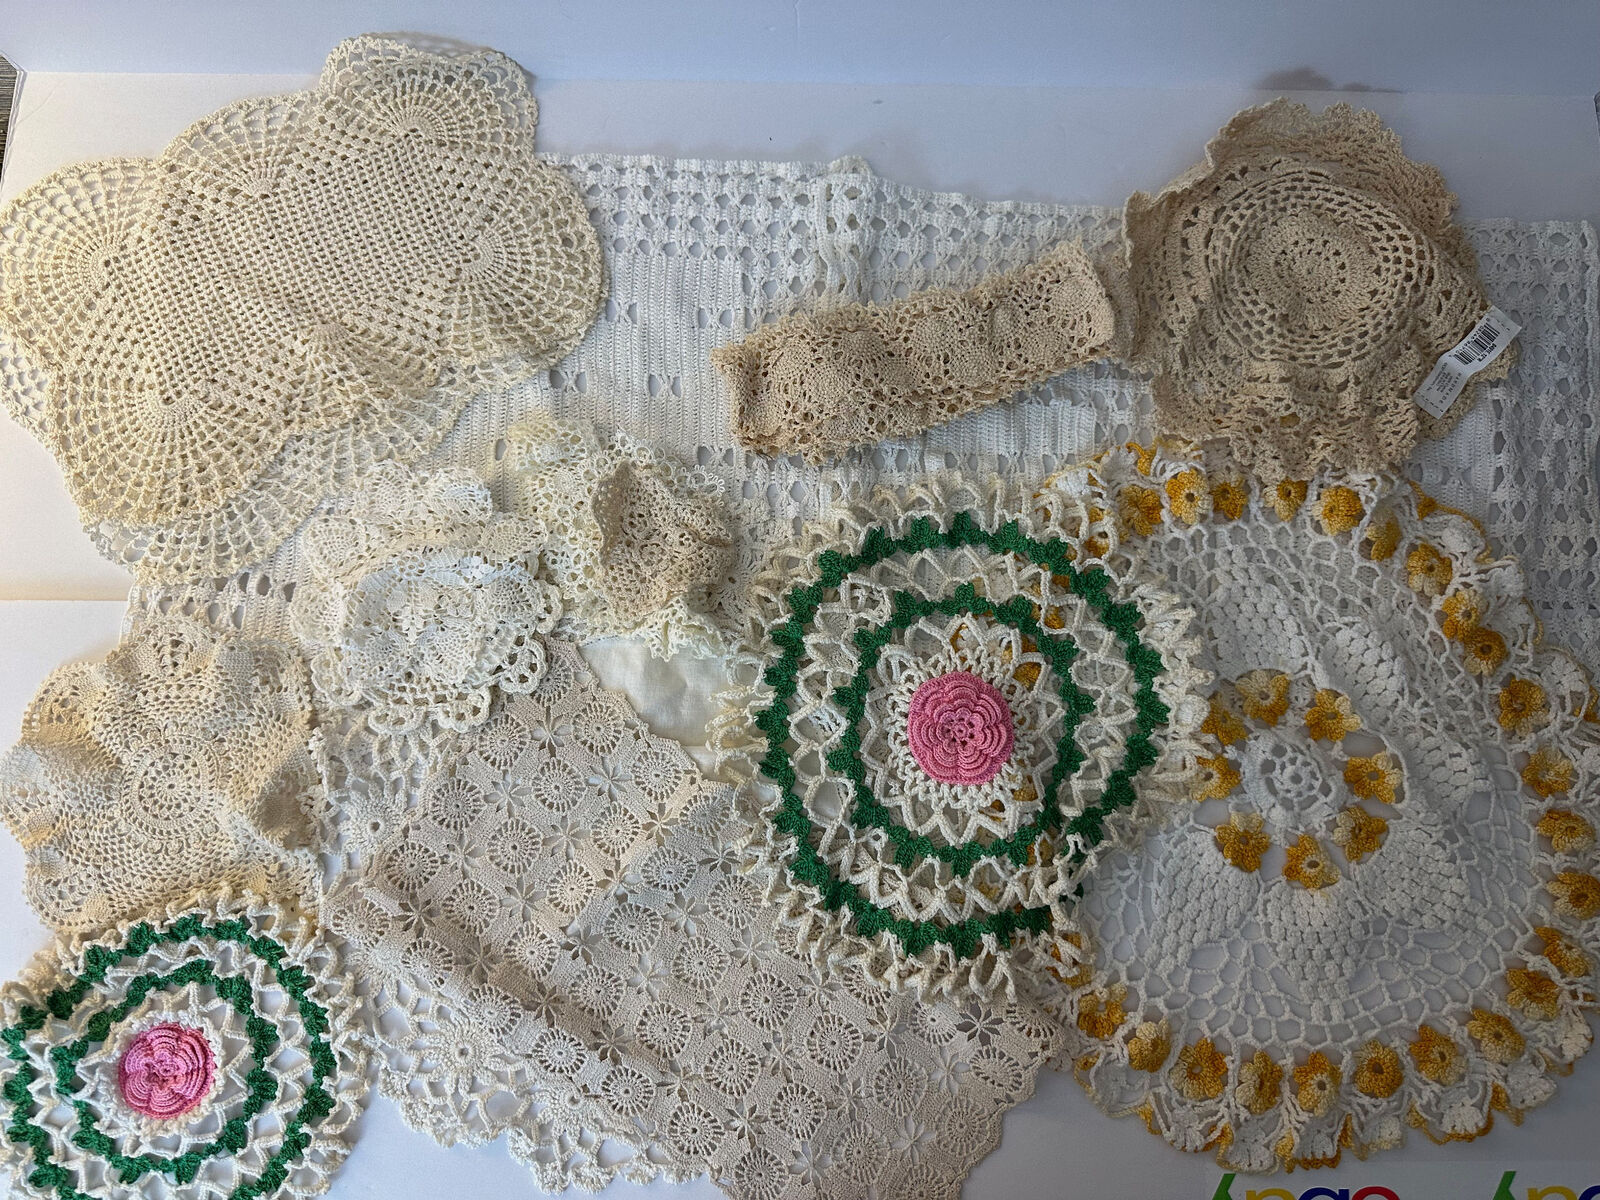 LOT of 20 VINTAGE handmade assorted doily Doillies